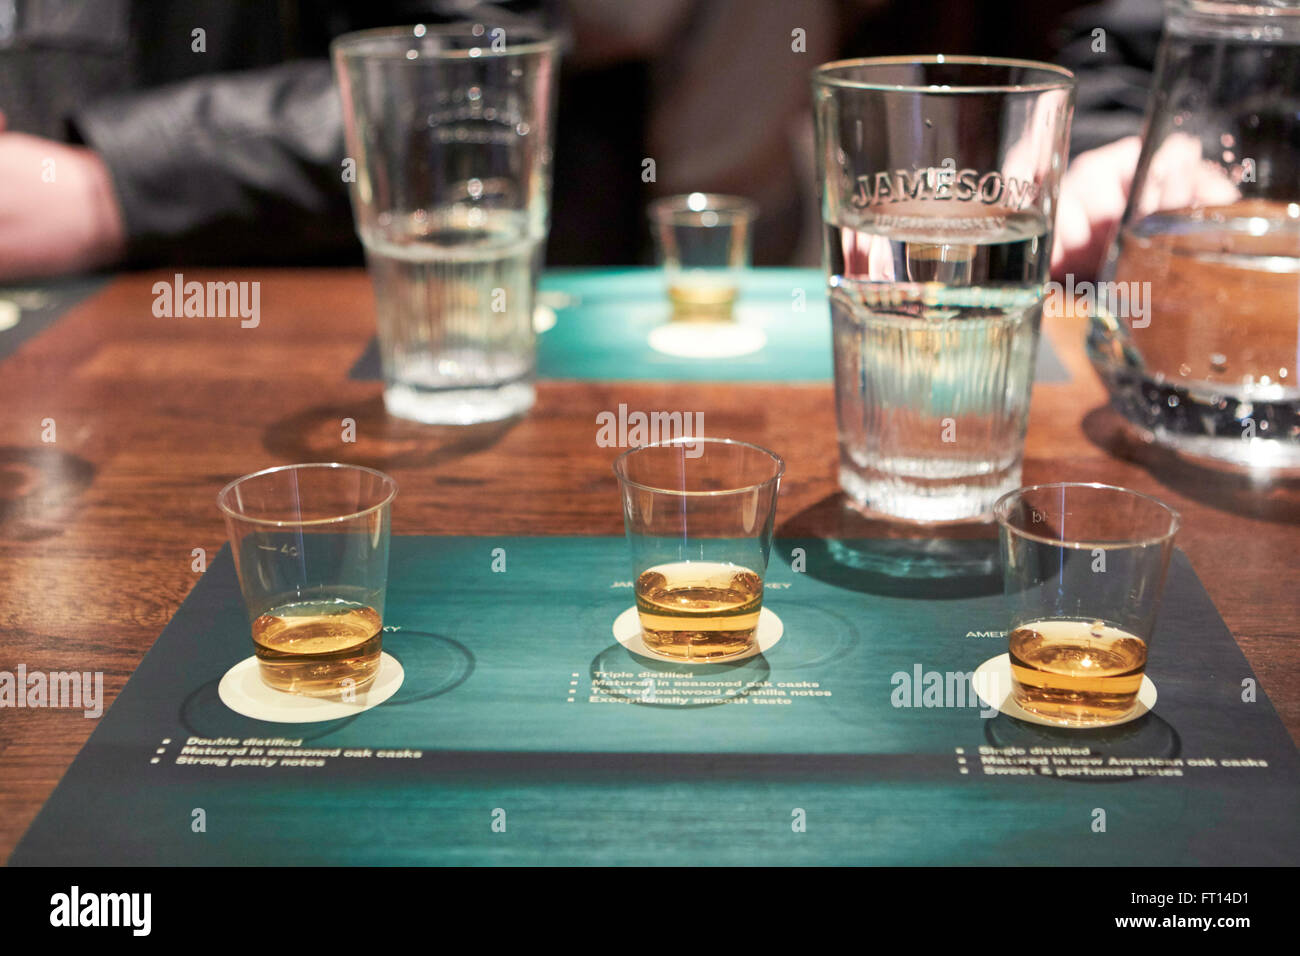 whiskey tasting session at the Jameson old whiskey distillery experience dublin Ireland Stock Photo